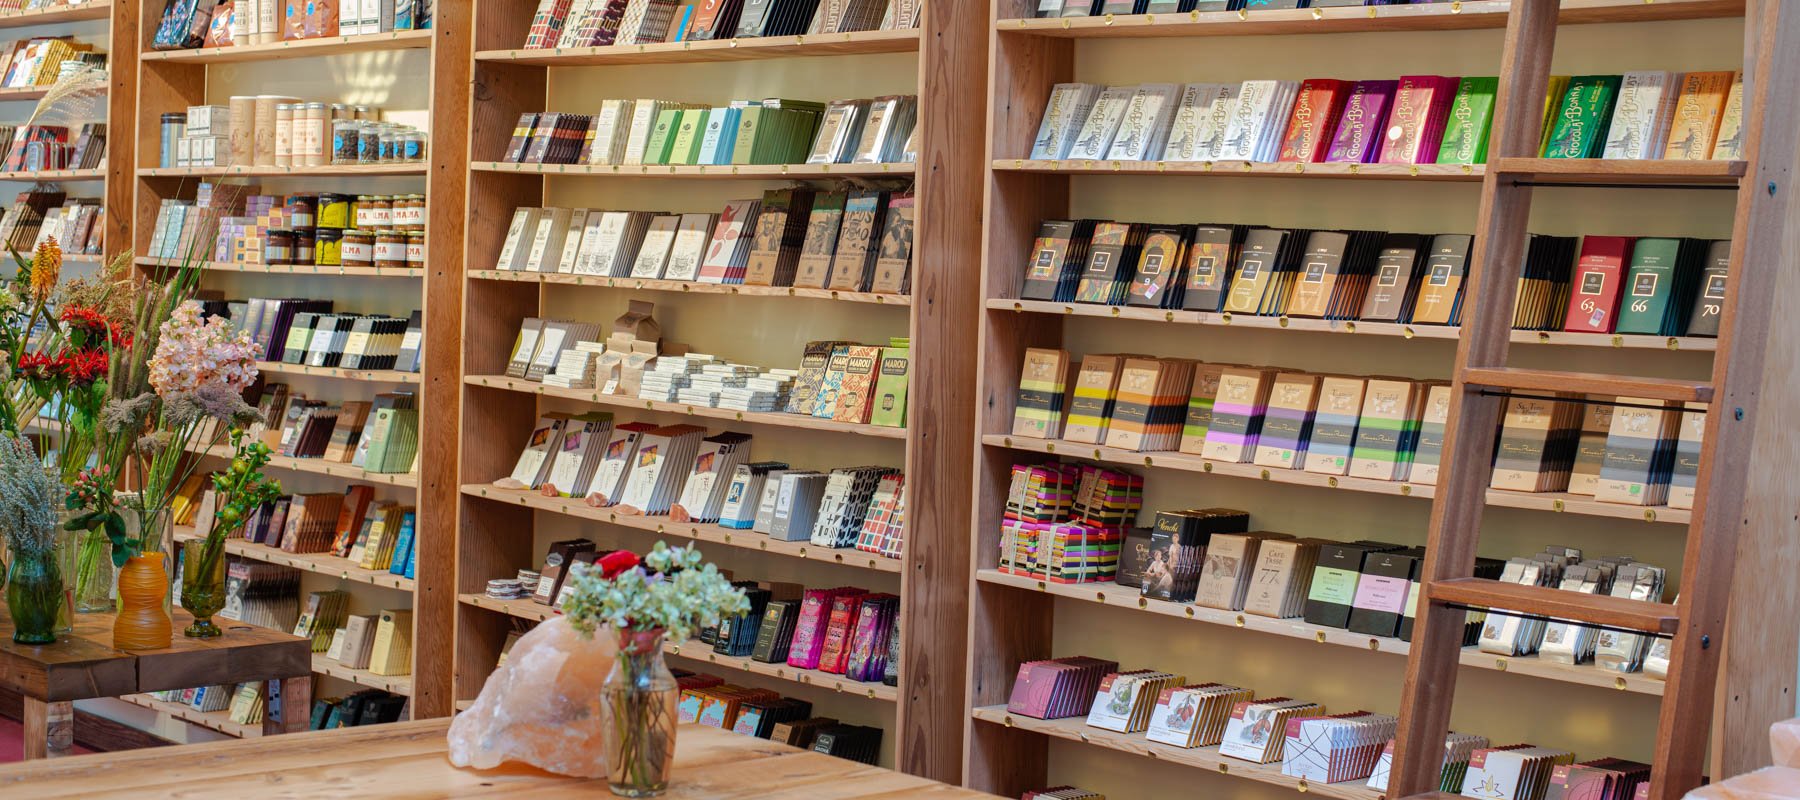 The largest curated collection of craft chocolate in the world.